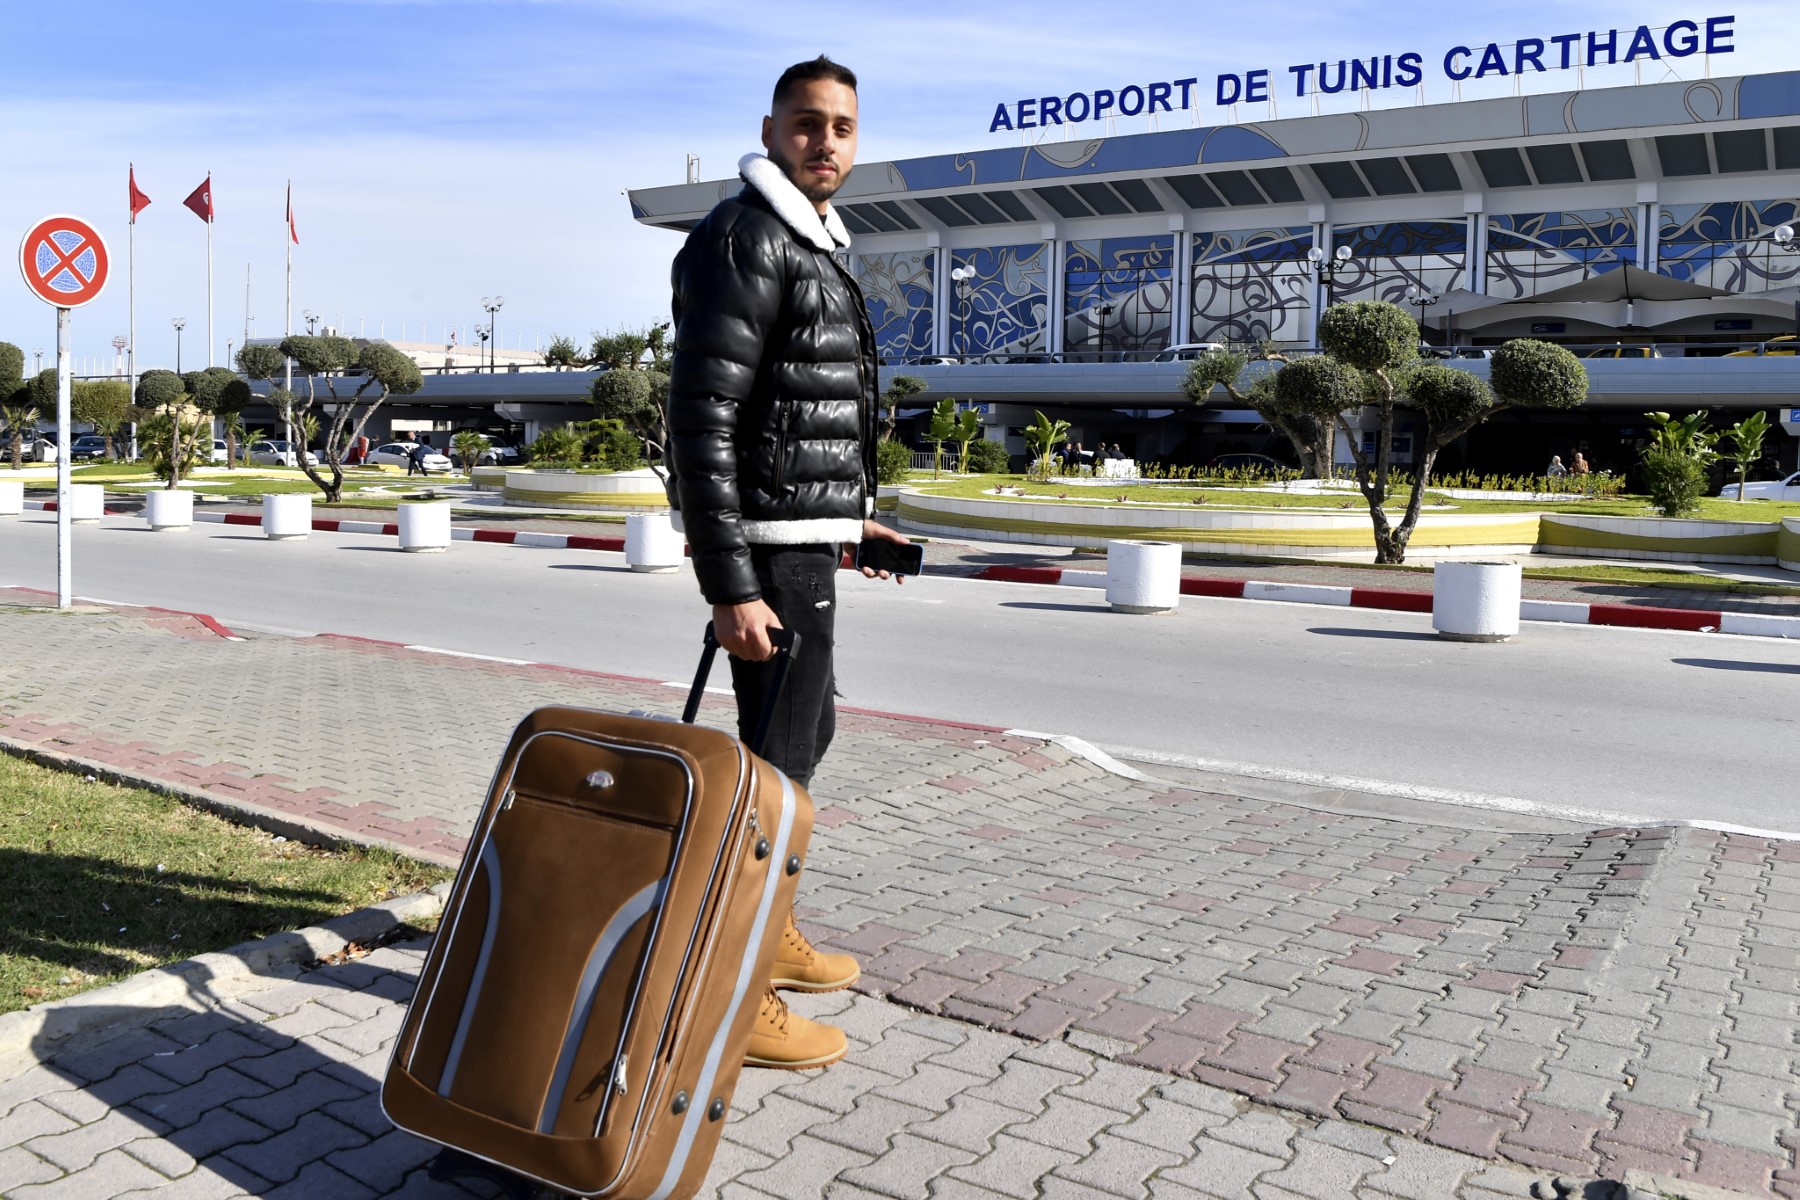 Tunisians dream of moving to Germany as crisis bites